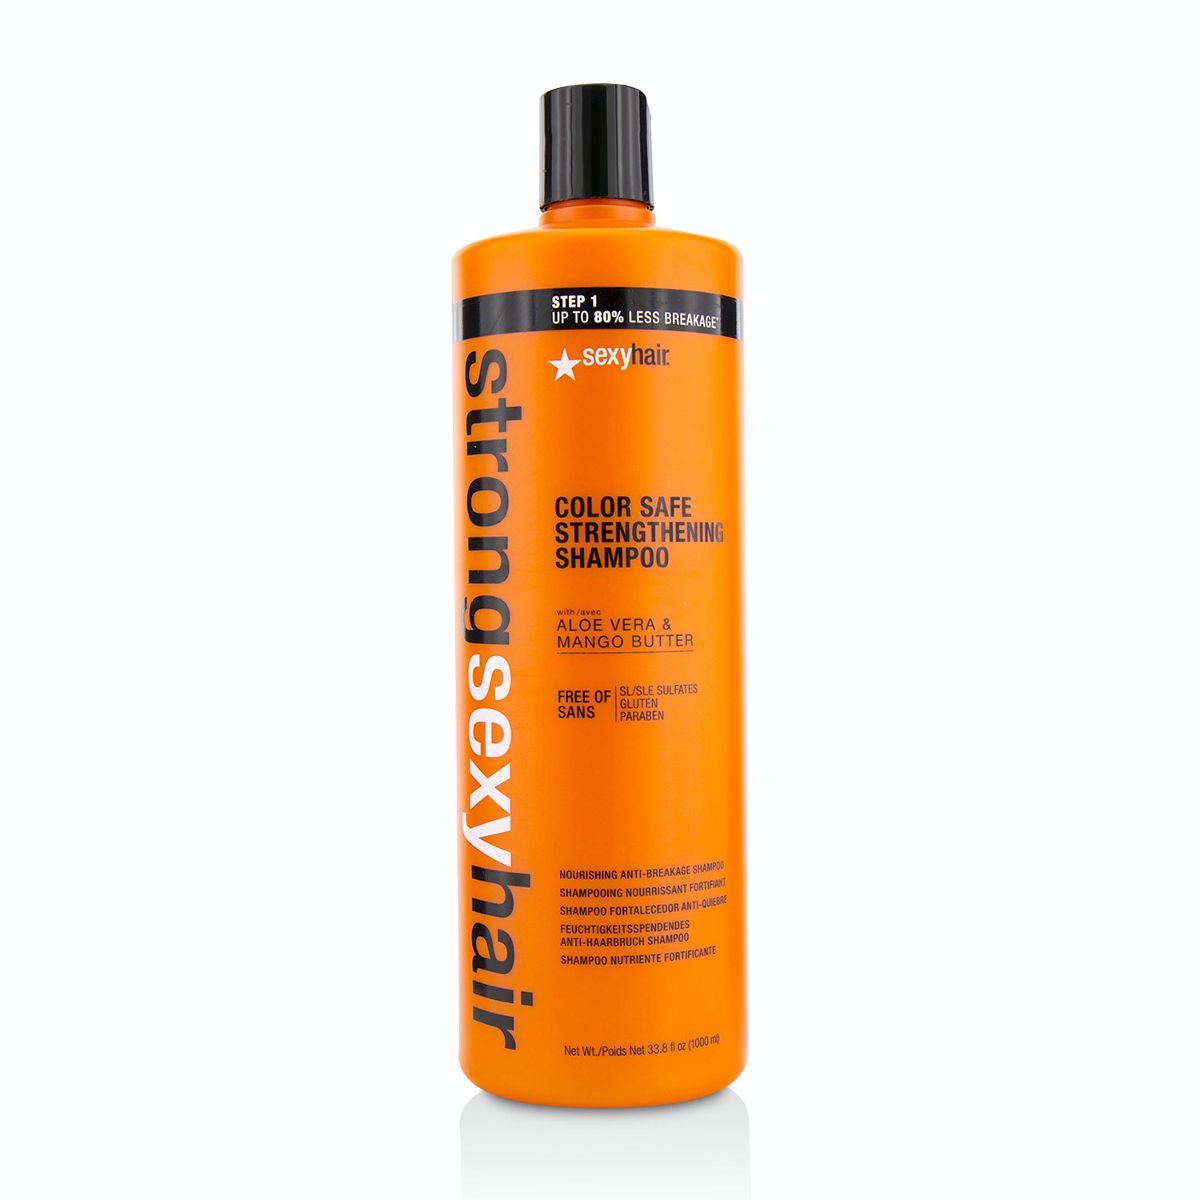 Strong Sexy Hair Strengthening Nourishing Anti-Breakage Shampoo Sexy Hair Concepts Image